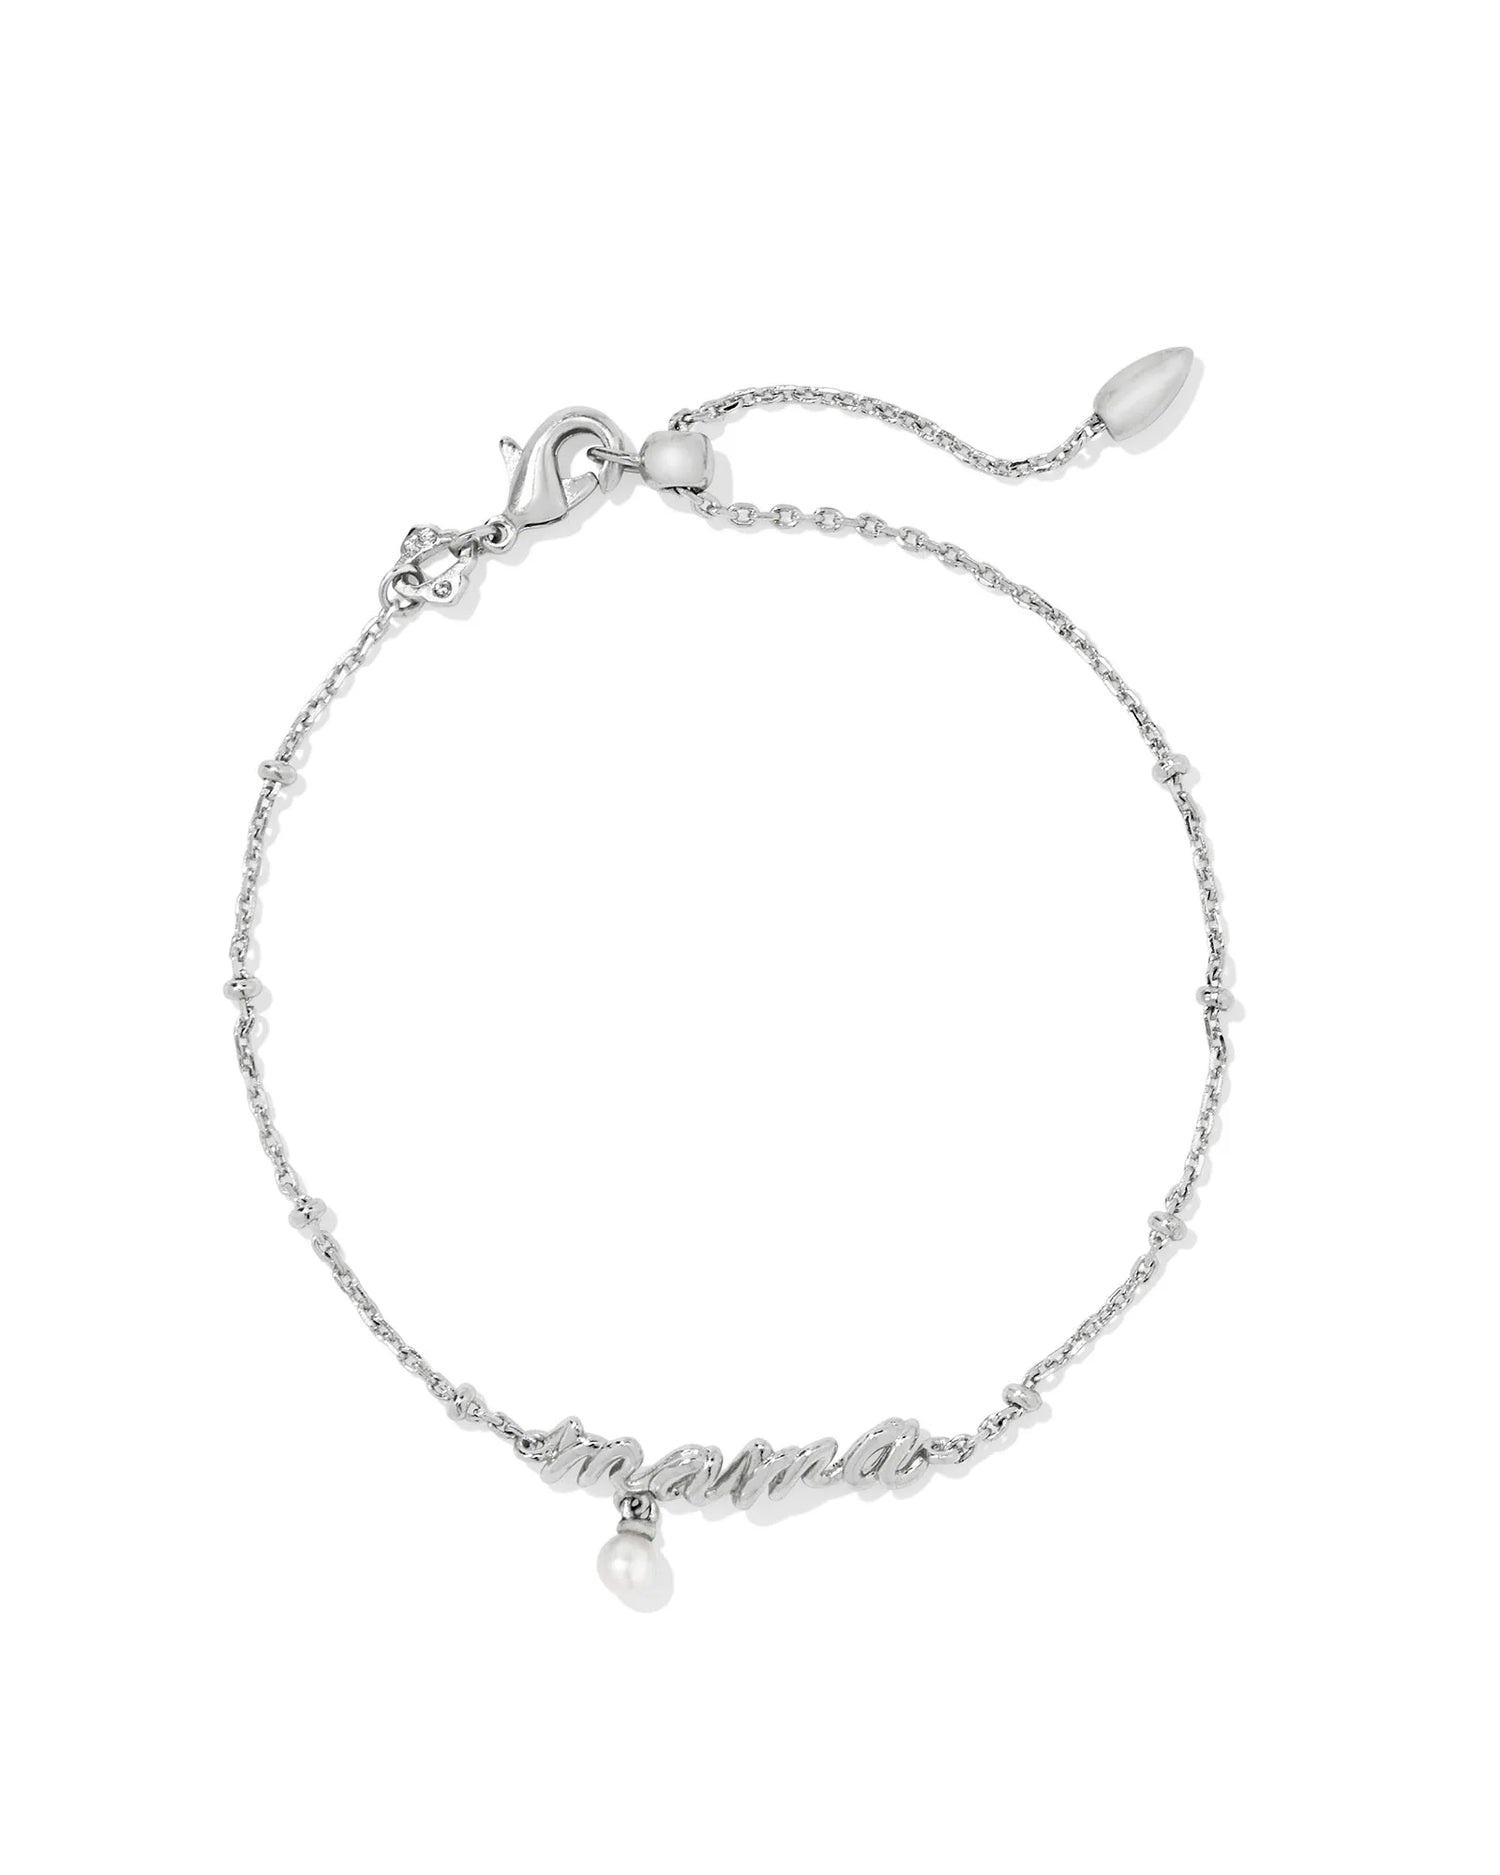 silver chain bracelet with "mama" scripter 8" Chain With .17"L X .94"W Pendant